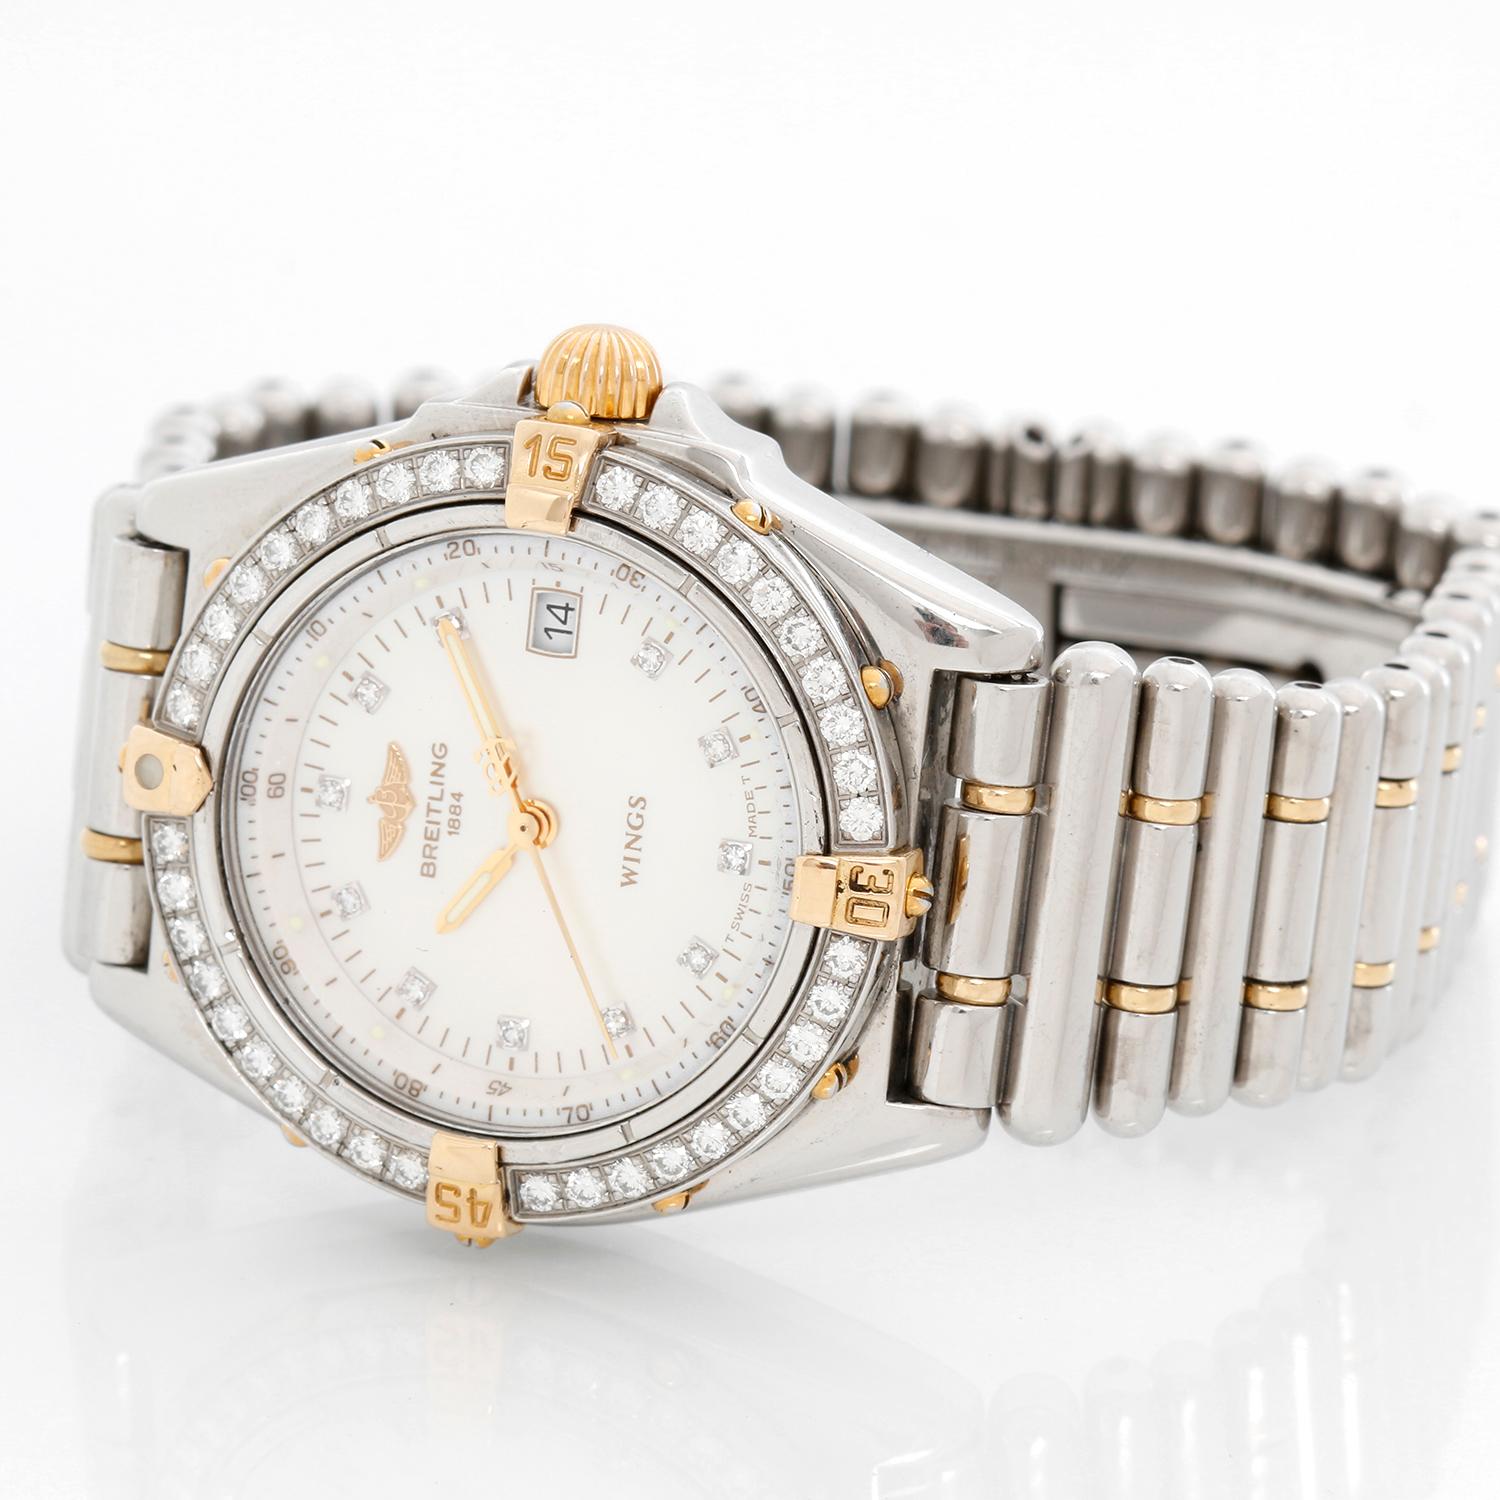 Breitling Wings Lady Steel and Gold Diamond Watch B67350 - Quartz . Stainless steel case with a diamond bezel ( 31 mm ) . Mother of Pearl dial with diamond hour markers . Stainless steel and gold band with a double deployant buckle . Pre-owned with